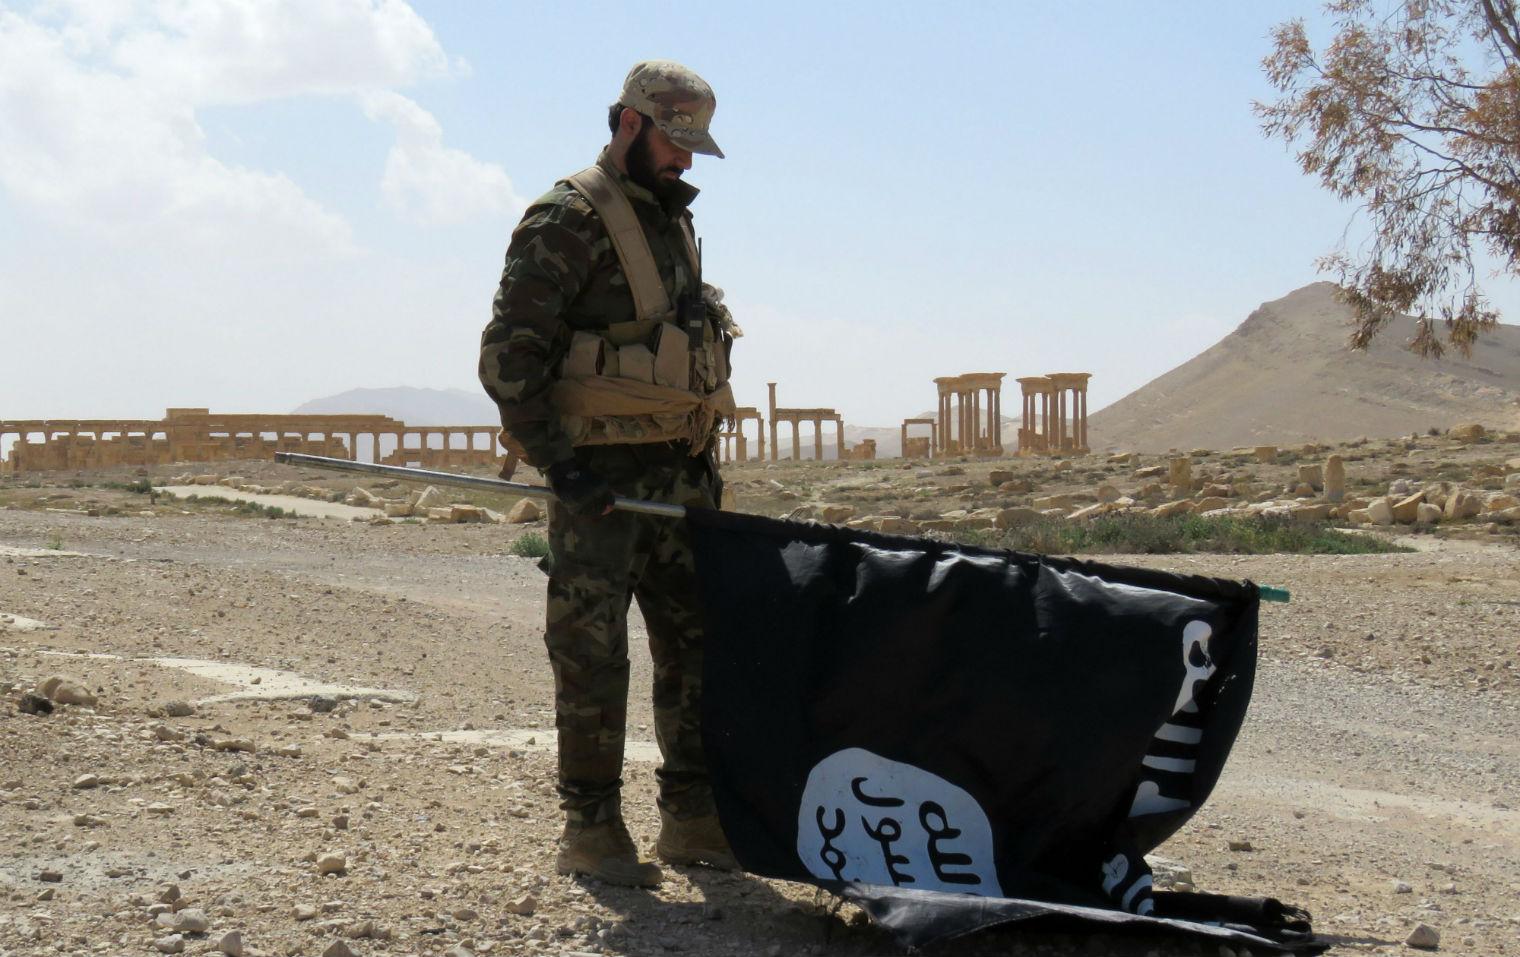 A member of the Syrian pro-government forces carries an Isis flag in Palmyra on 27 March 2016